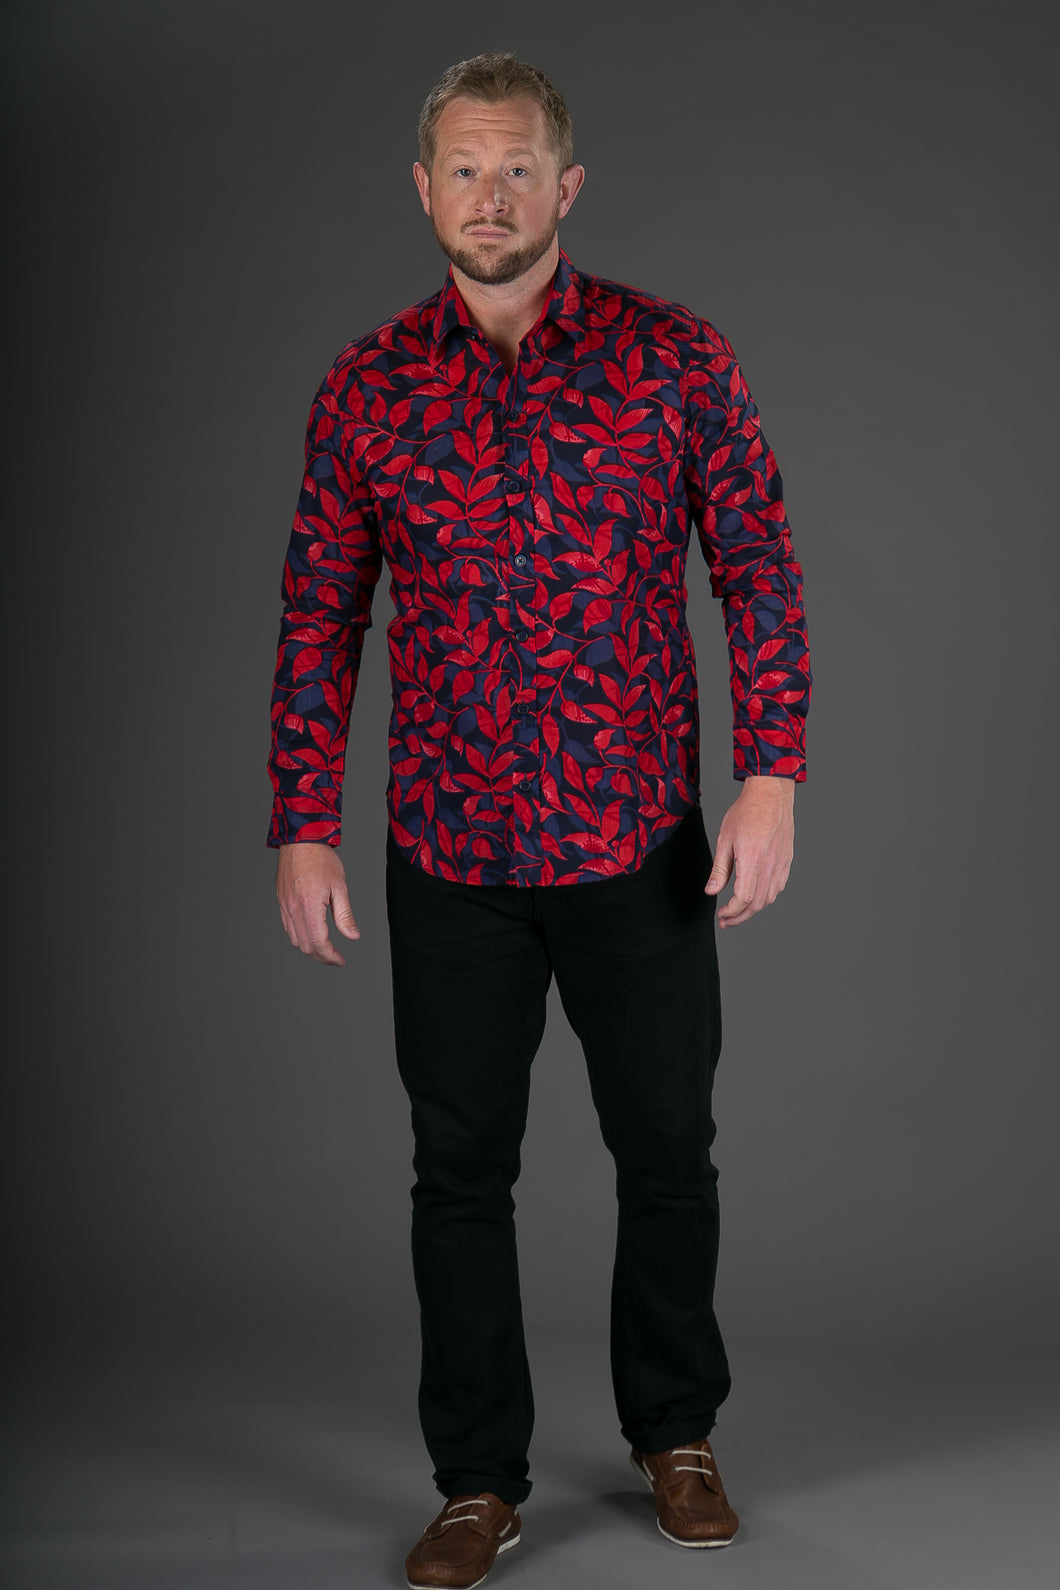 Blue Red Floral Print Cotton Slim and Regular Fit Mens Shirt Long Sleeve